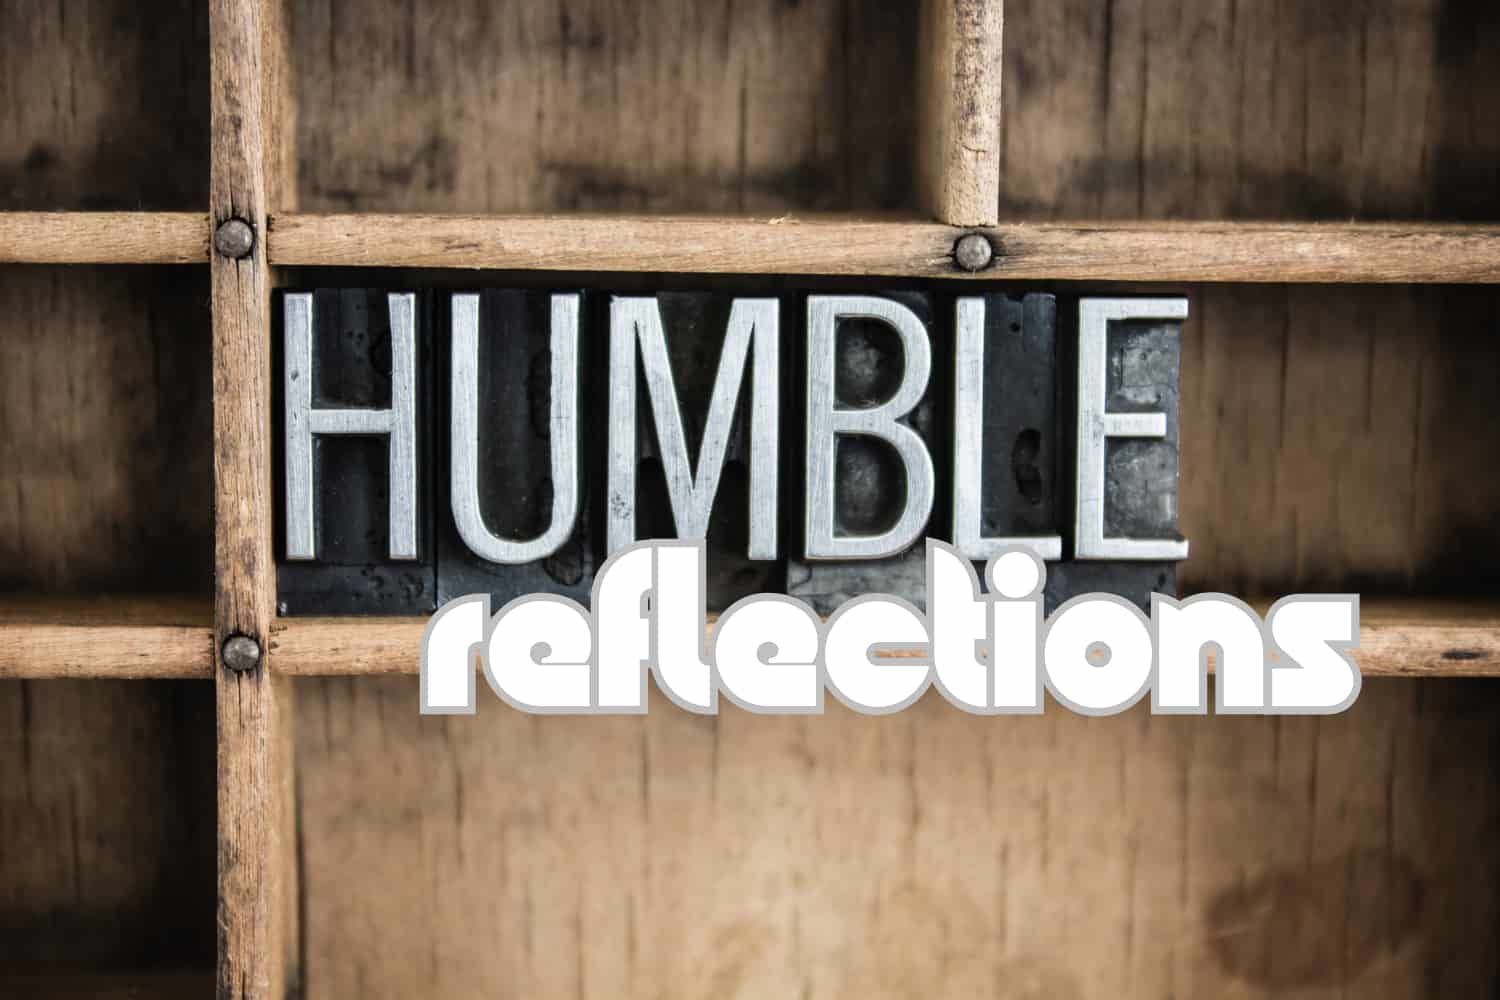 Object%20lesson%20-%20NT%20The%20pharisee%20and%20the%20tax%20collector%20-%20Humble%20reflections-5792de36 Temple